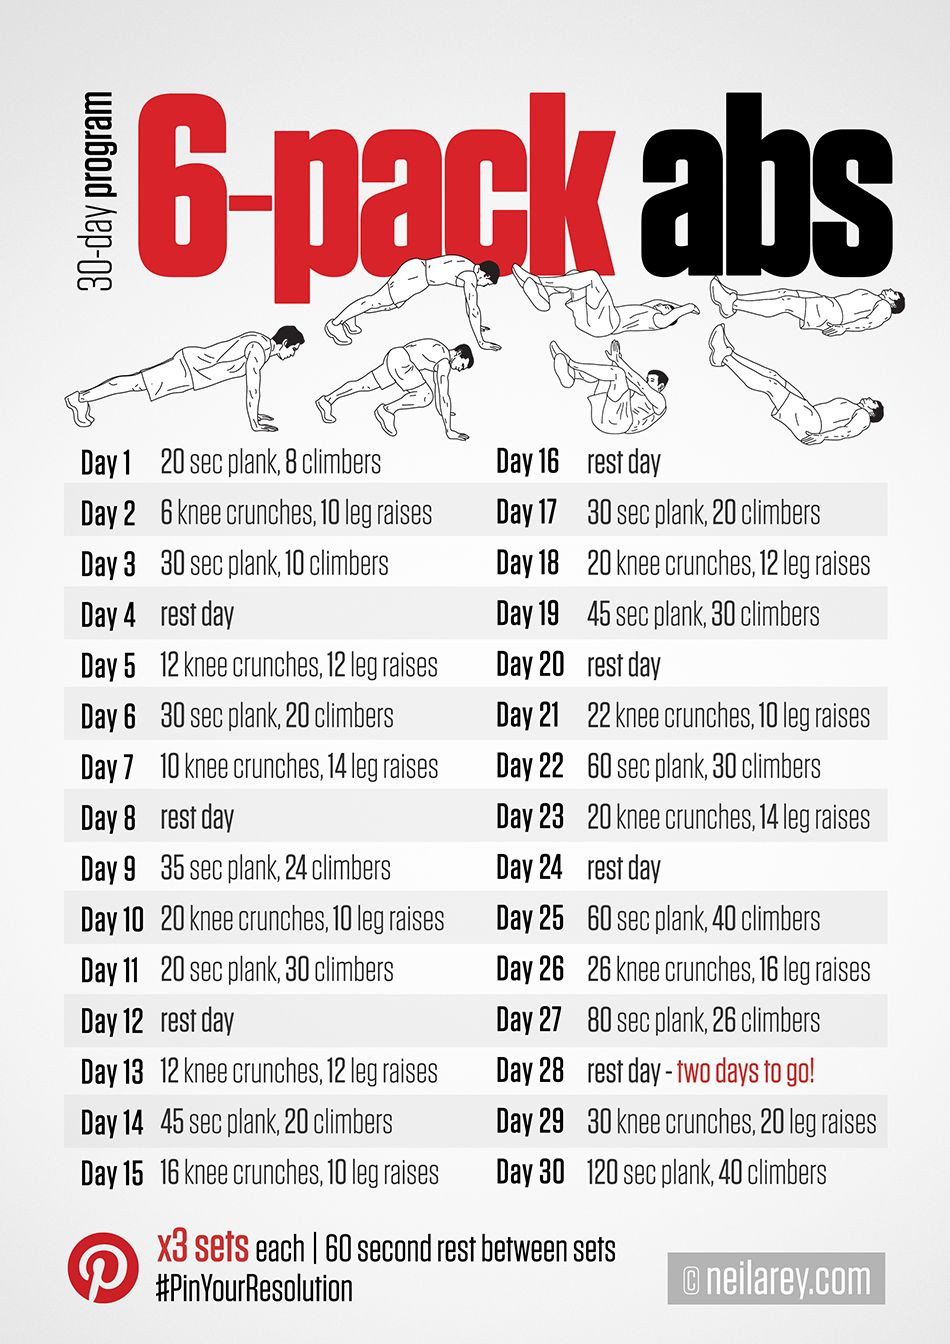 6-Pack Abs For 2014! 30-Day Program To Toned Abs. X3 Sets  30 Days Harder Abs Challenge Chart For Men